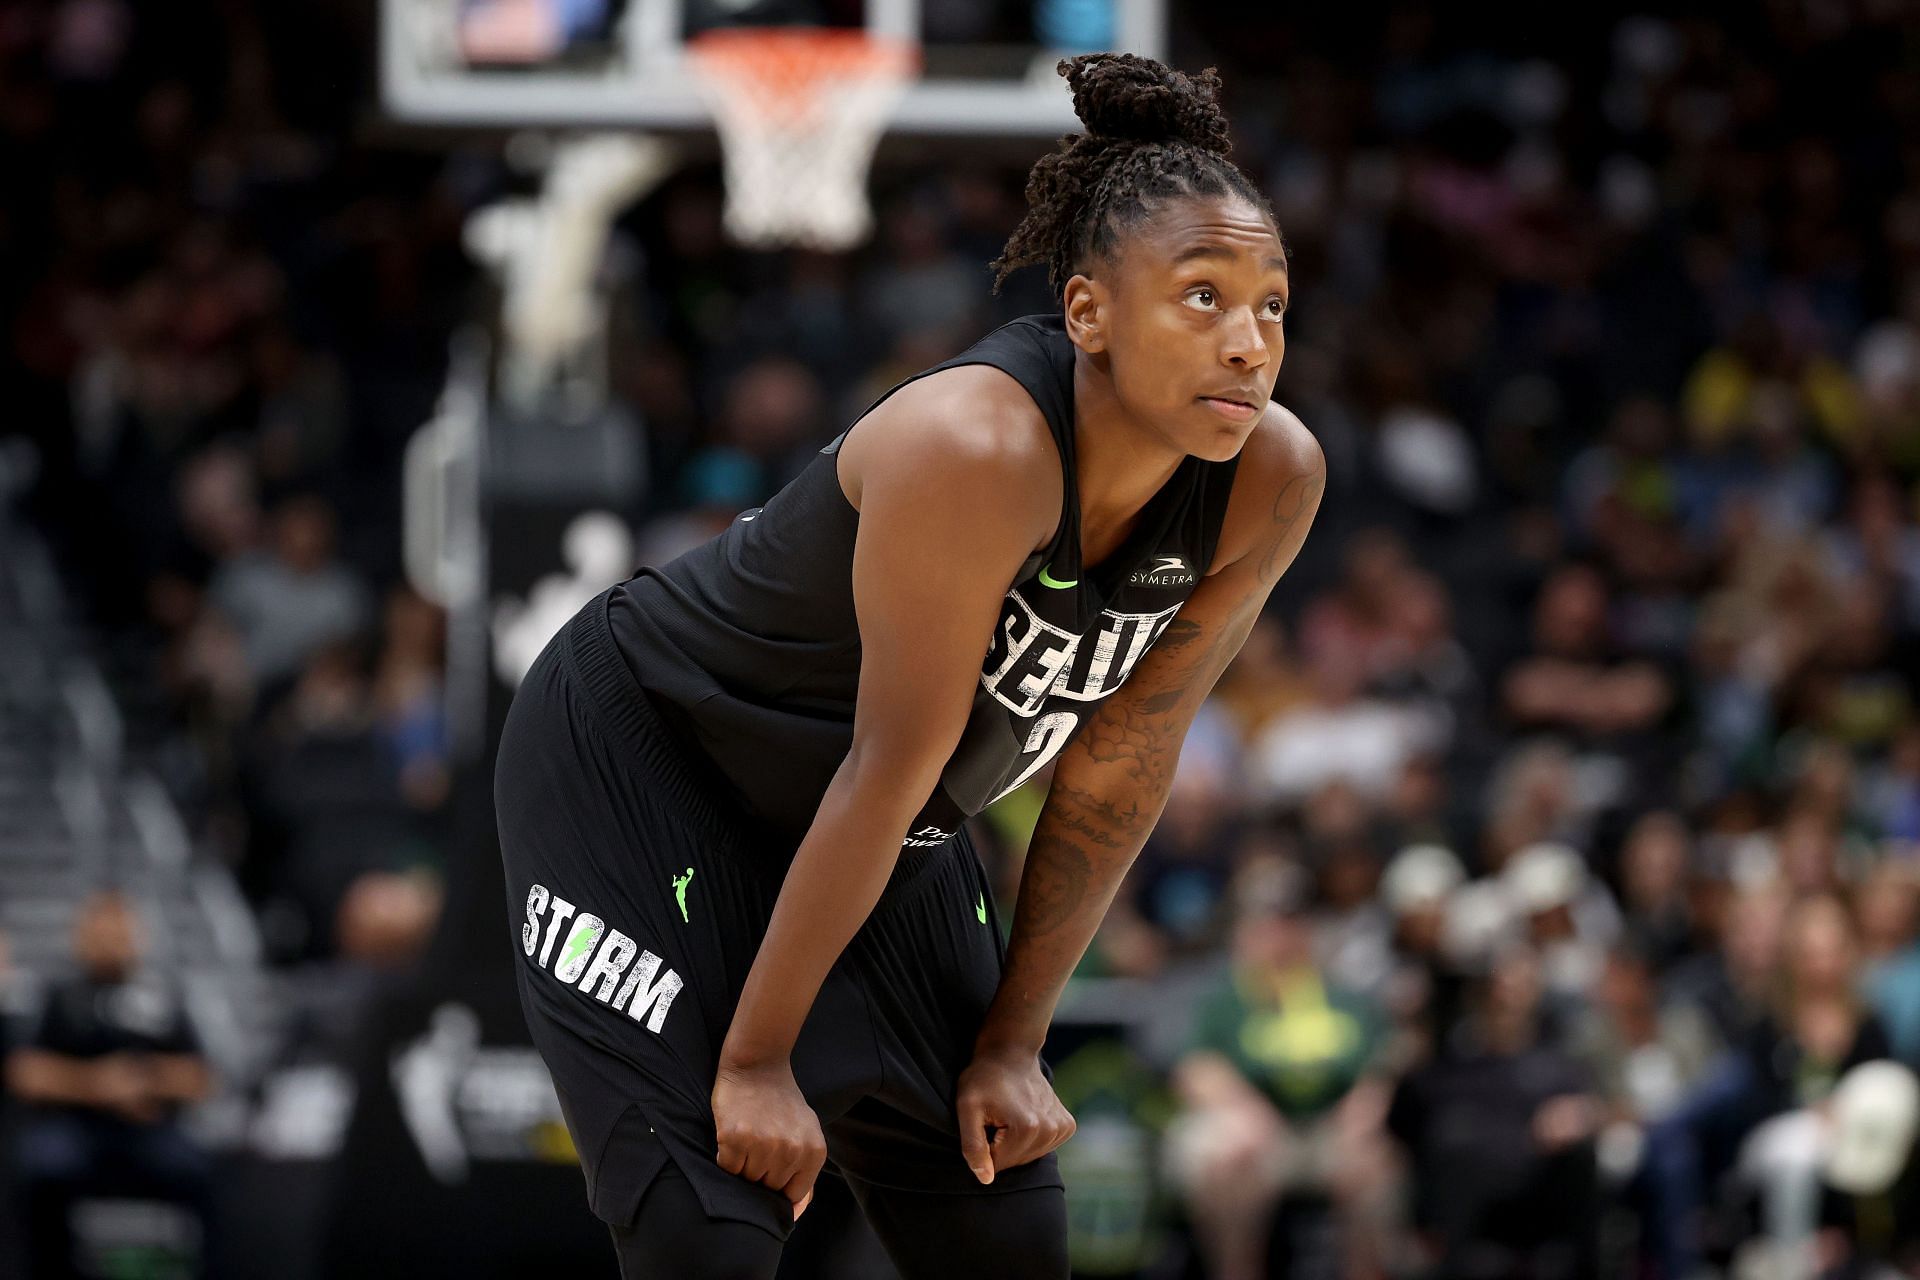 All eyes will be on Jewell Loyd in the Storm vs Sparks matchup (Image via Getty Images)